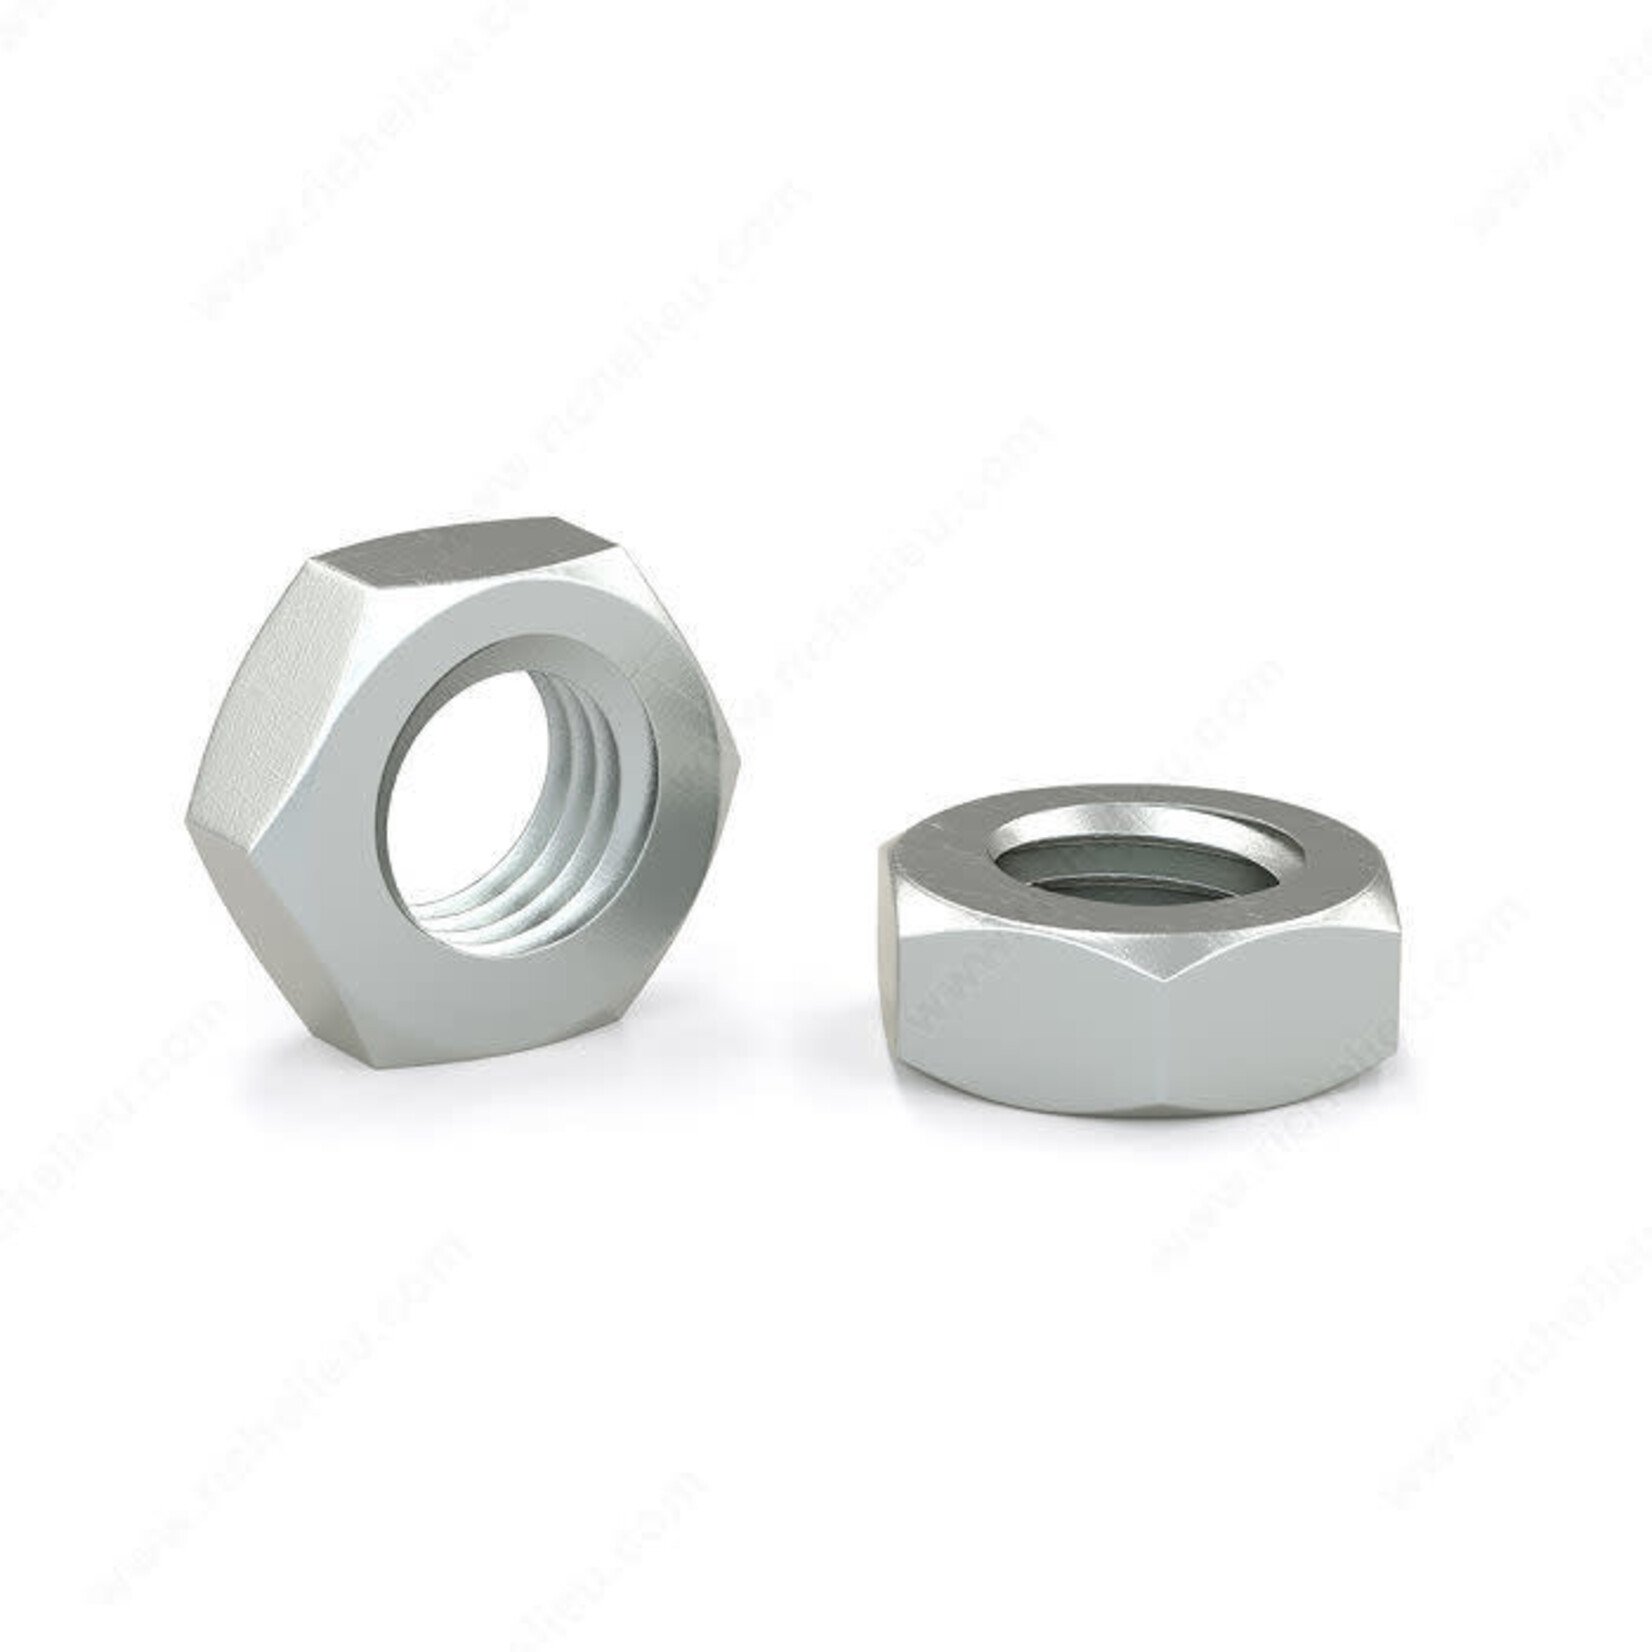 RELIABLE HEX NUT 8-32, 100PK